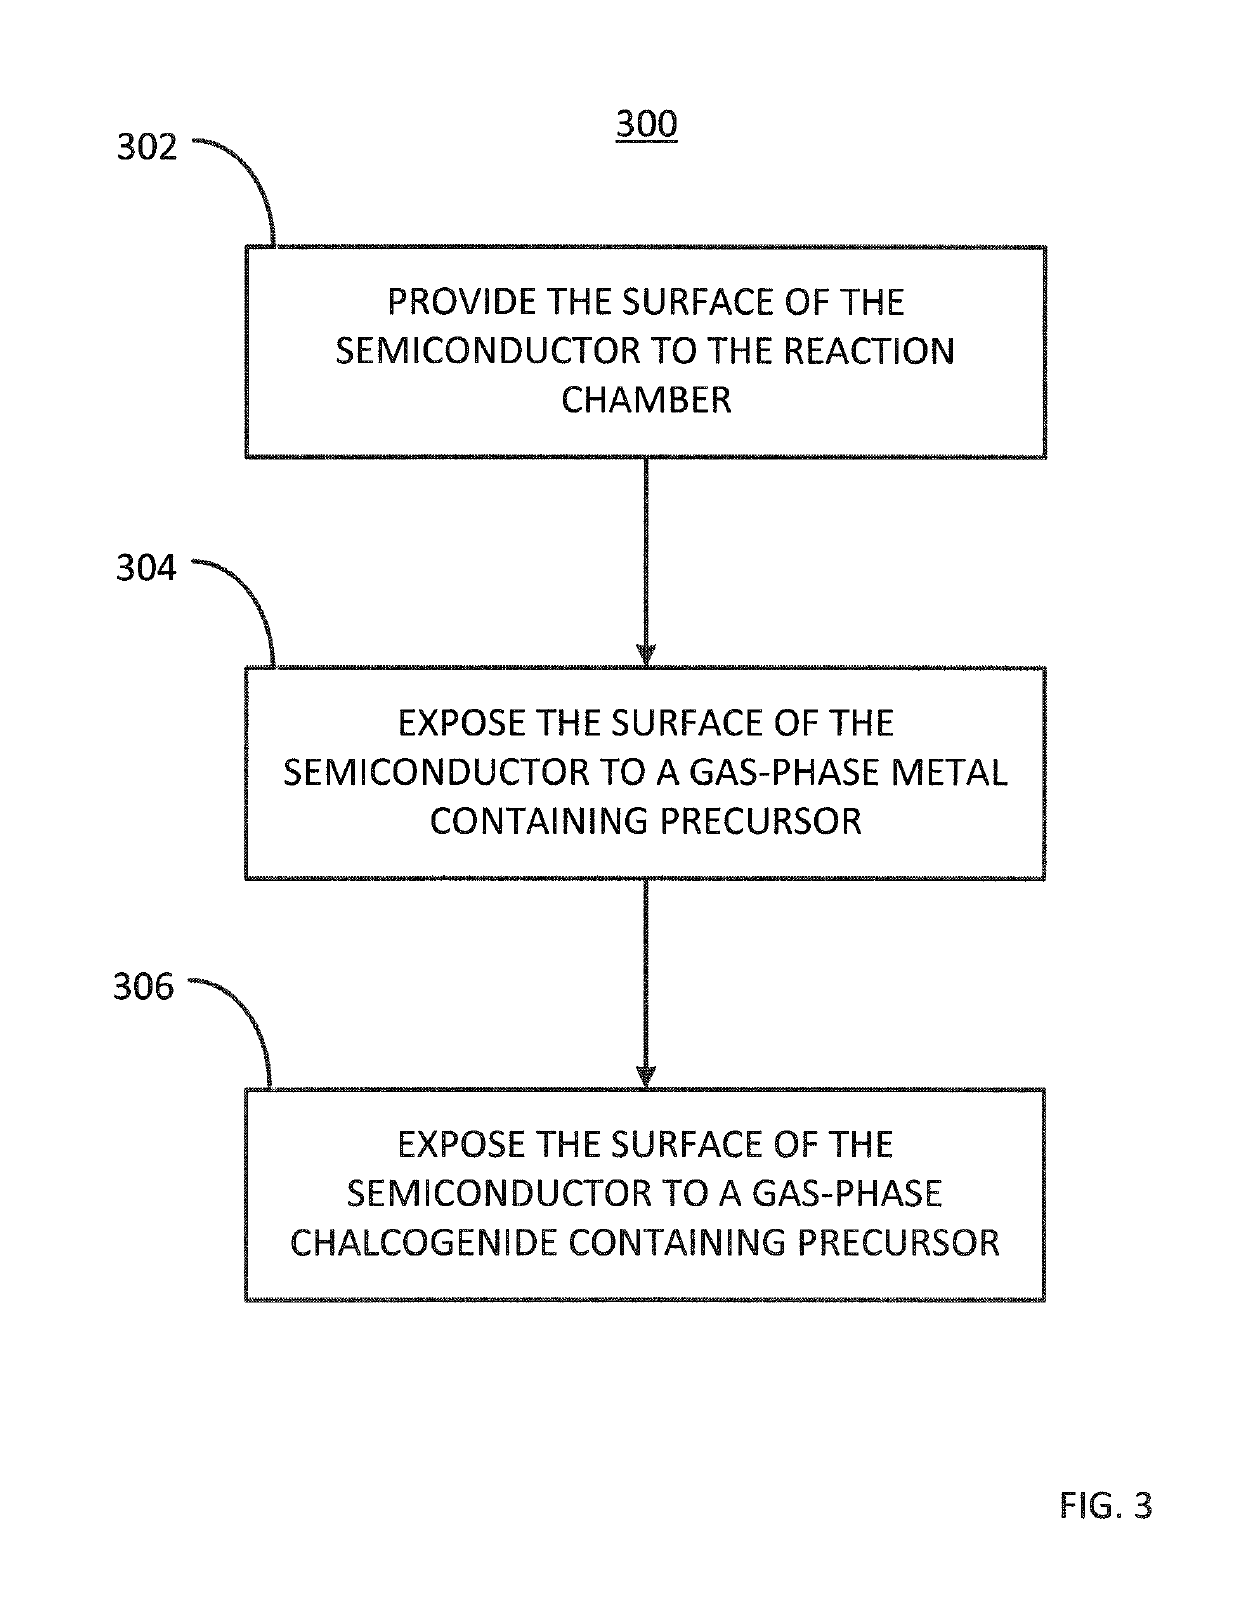 Method for passivating a surface of a semiconductor and related systems